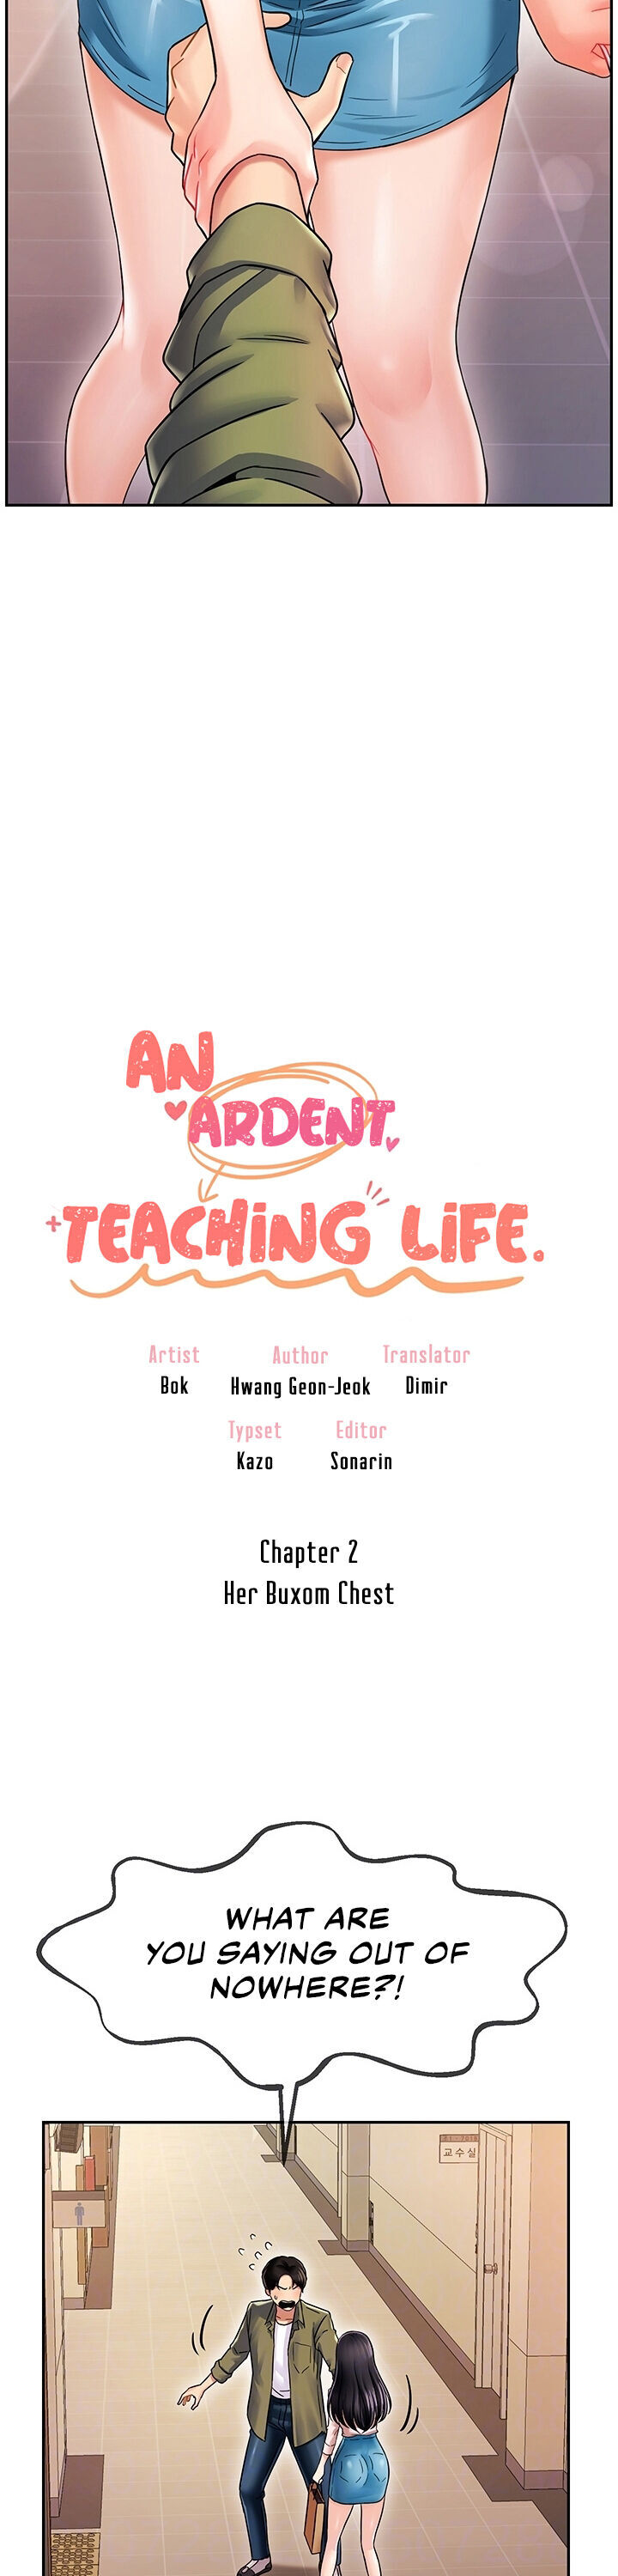 An Ardent Teaching Life - Chapter 2 Page 3